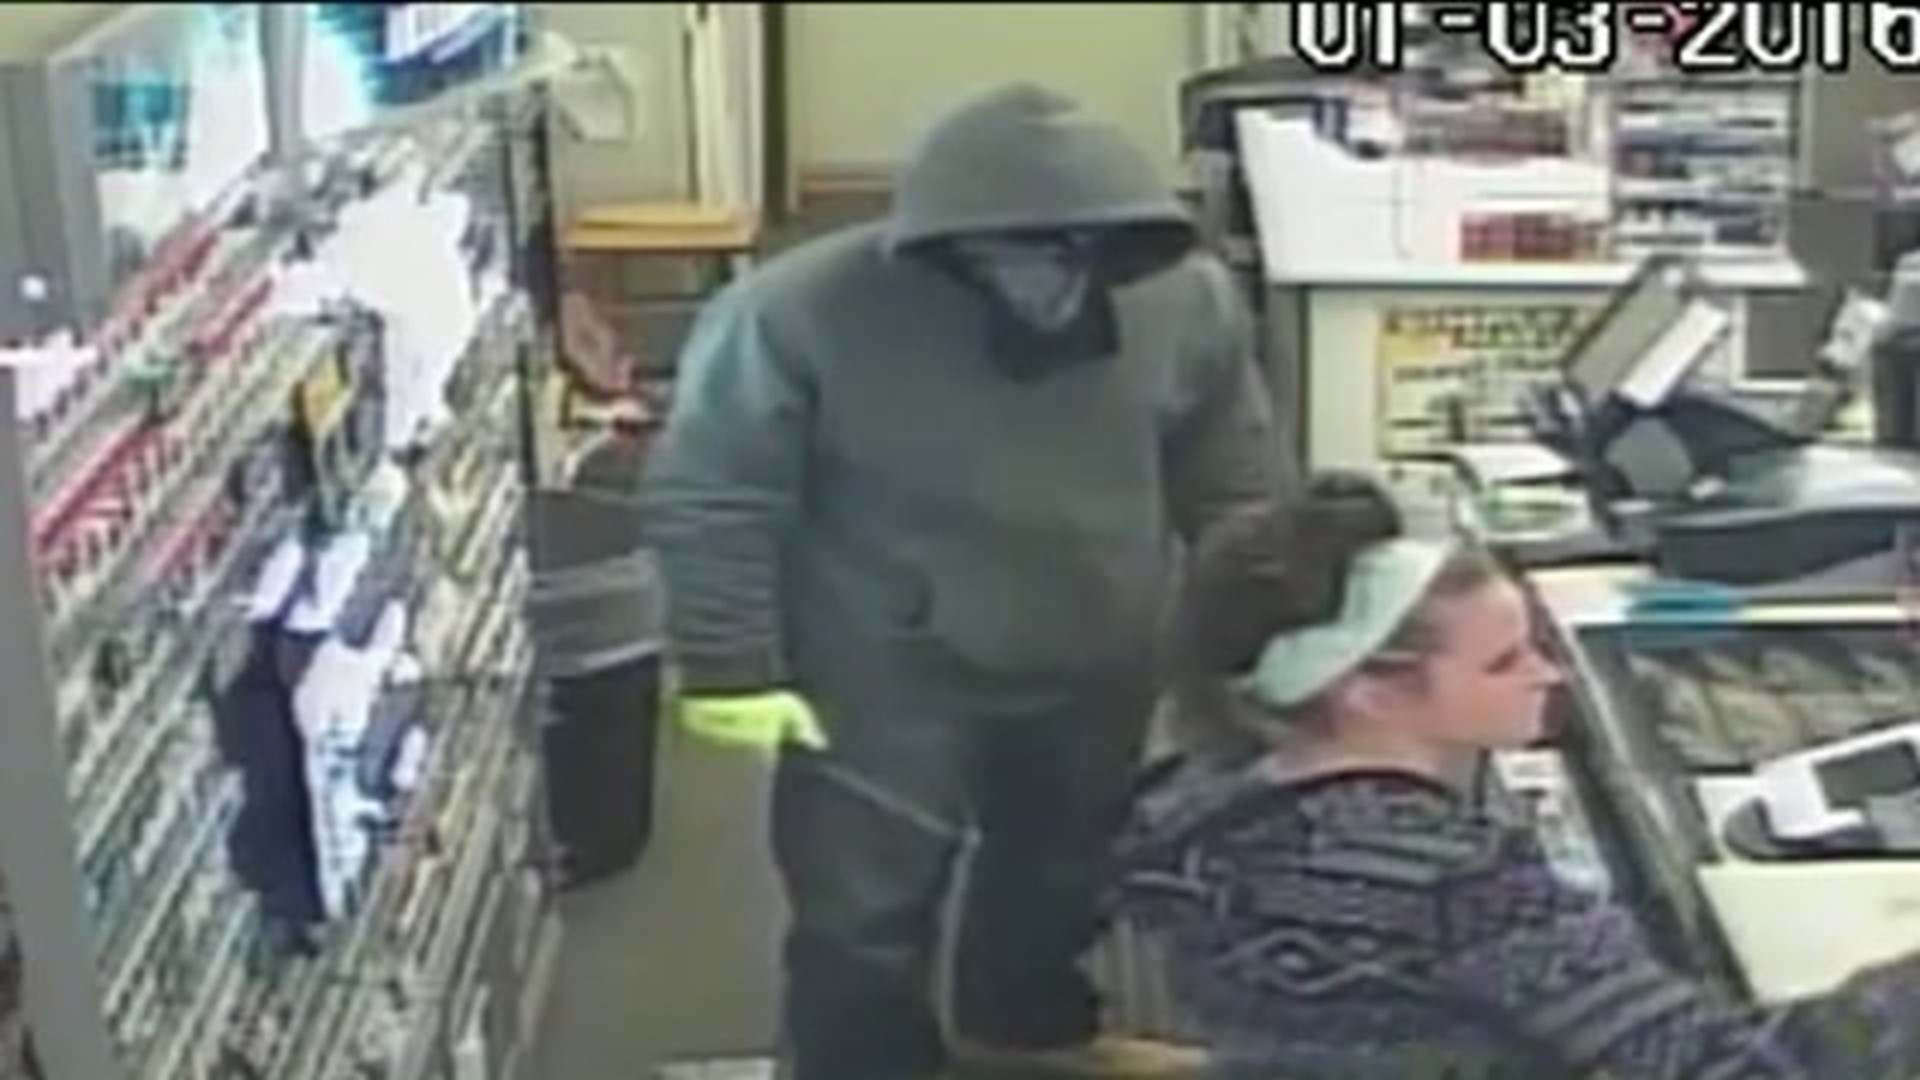 Reward Offered for Wanted Armed Robber